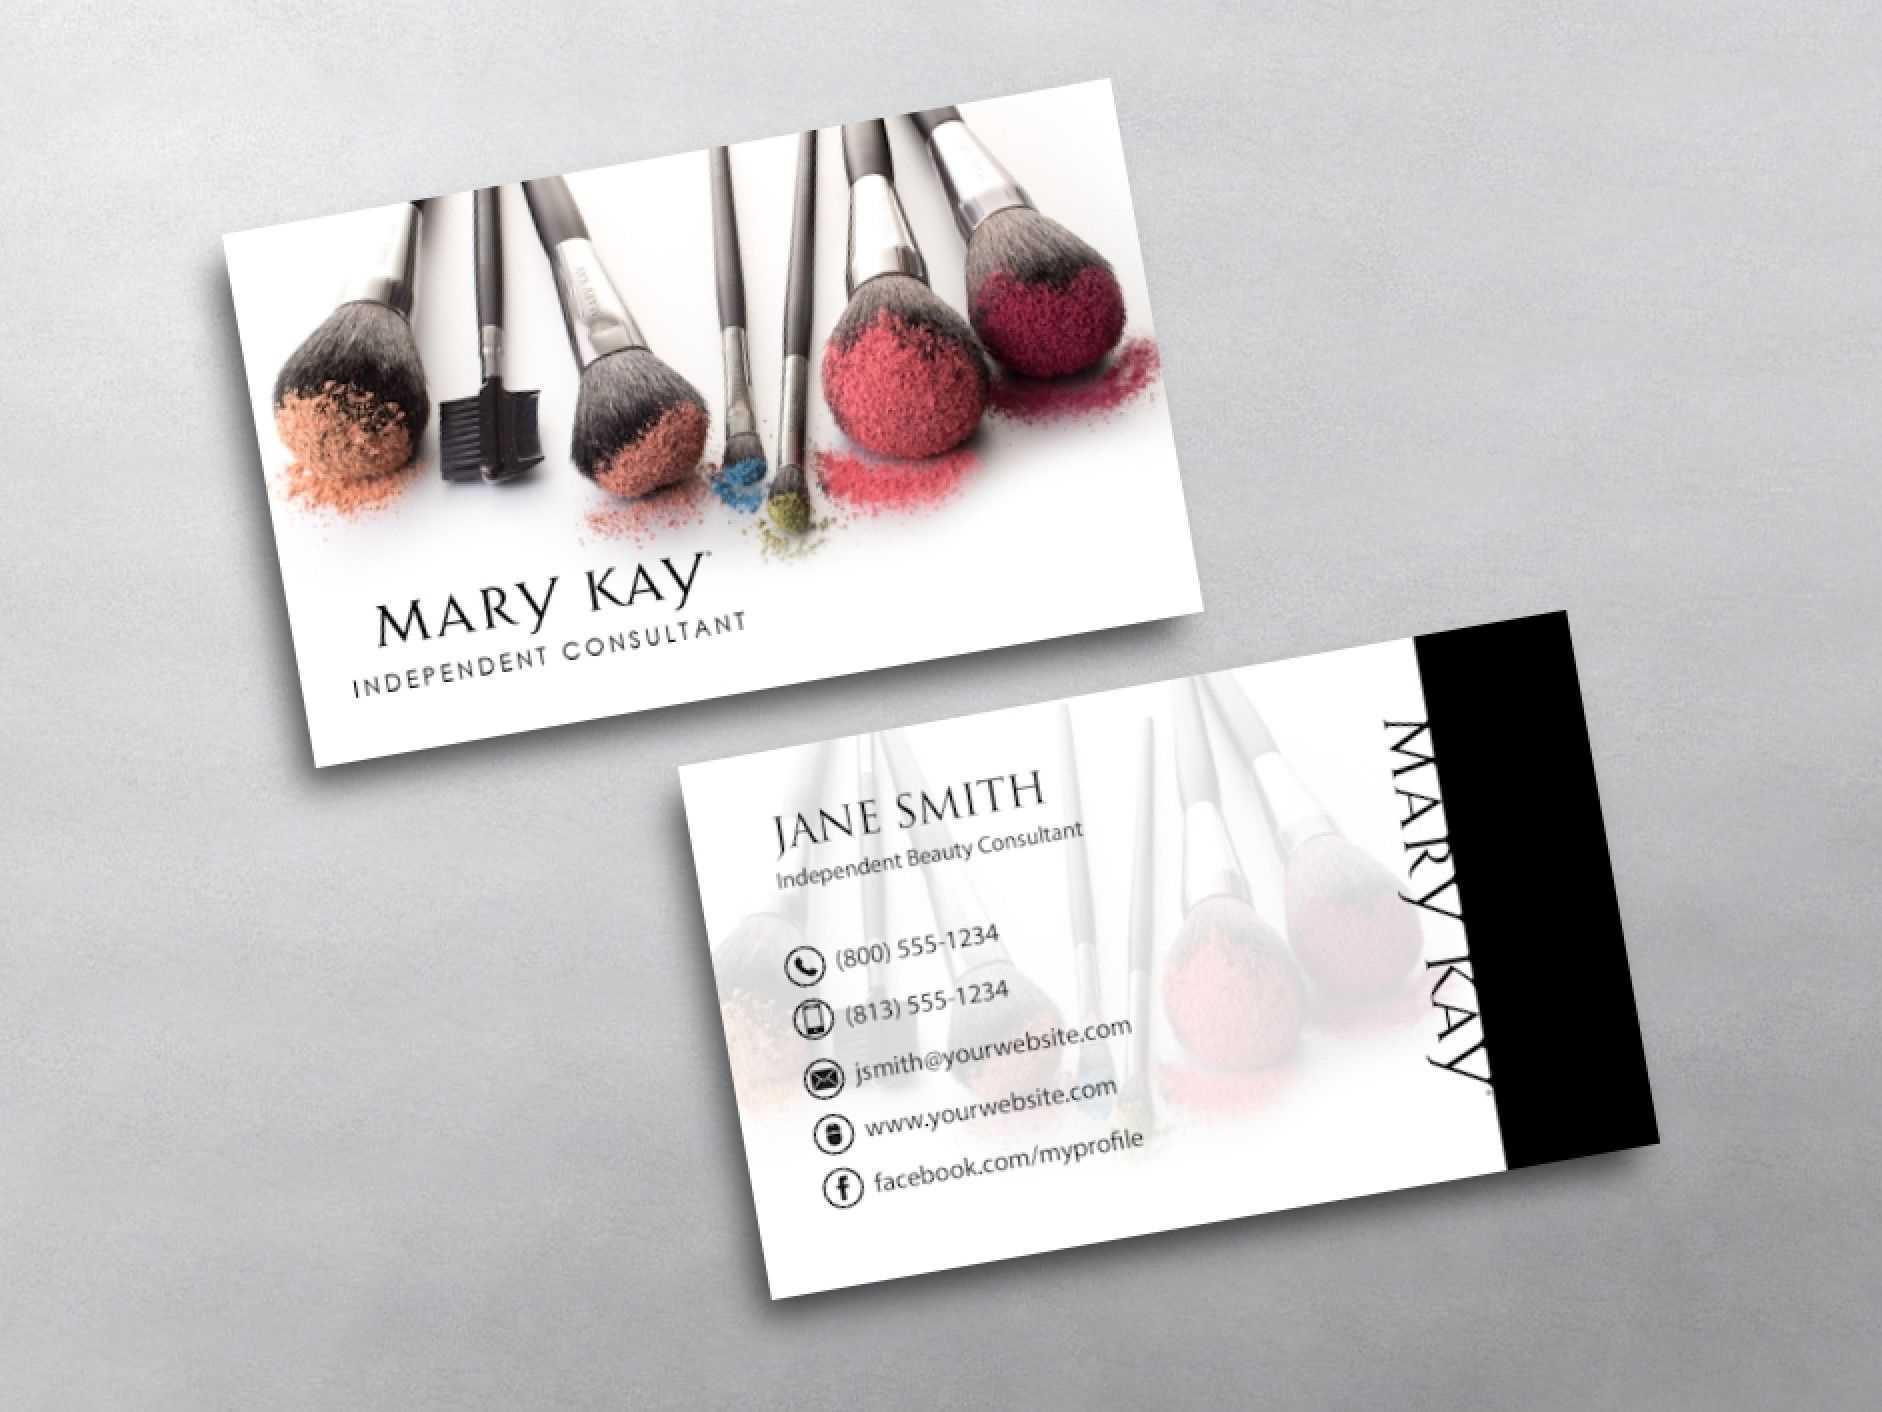 Mary Kay Business Cards In 2019 | Mary Kay, Makeup Artist With Regard To Mary Kay Business Cards Templates Free